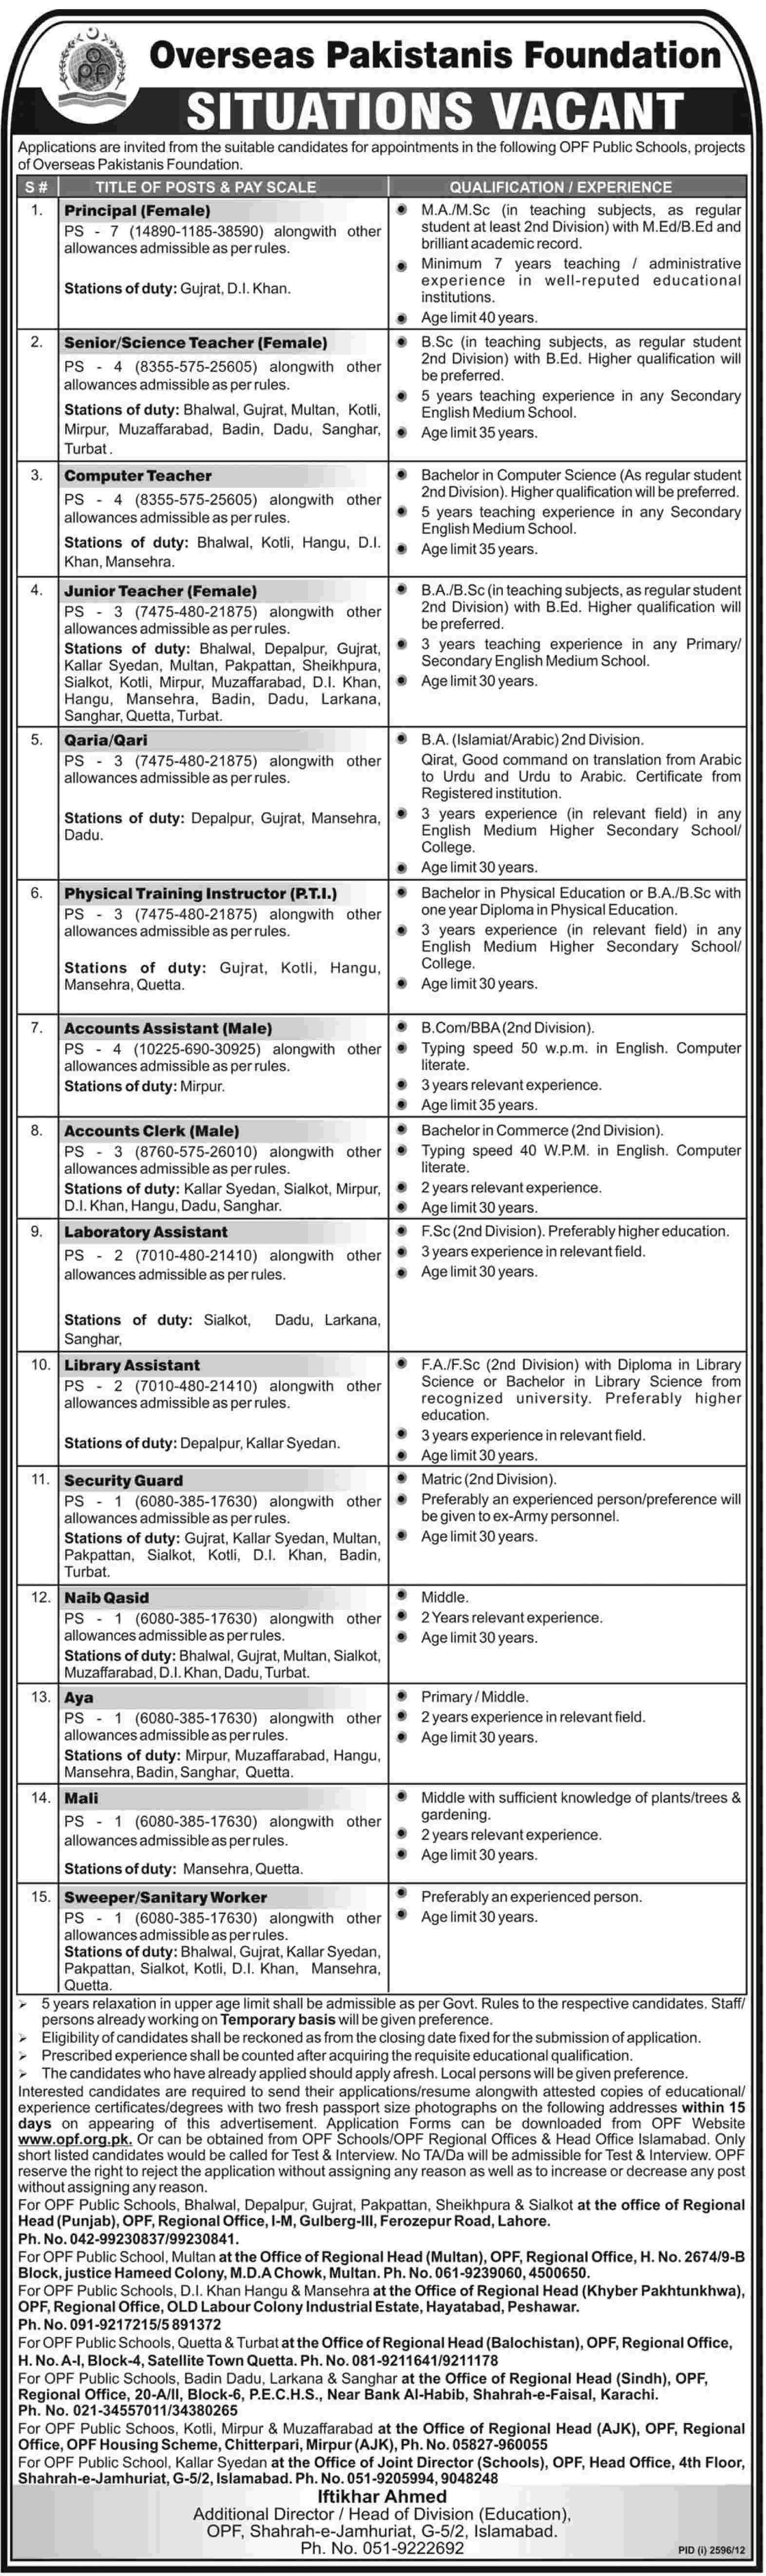 Overseas Pakistanis Foundation Public Schools Jobs 2012 for Teaching & Other Staff